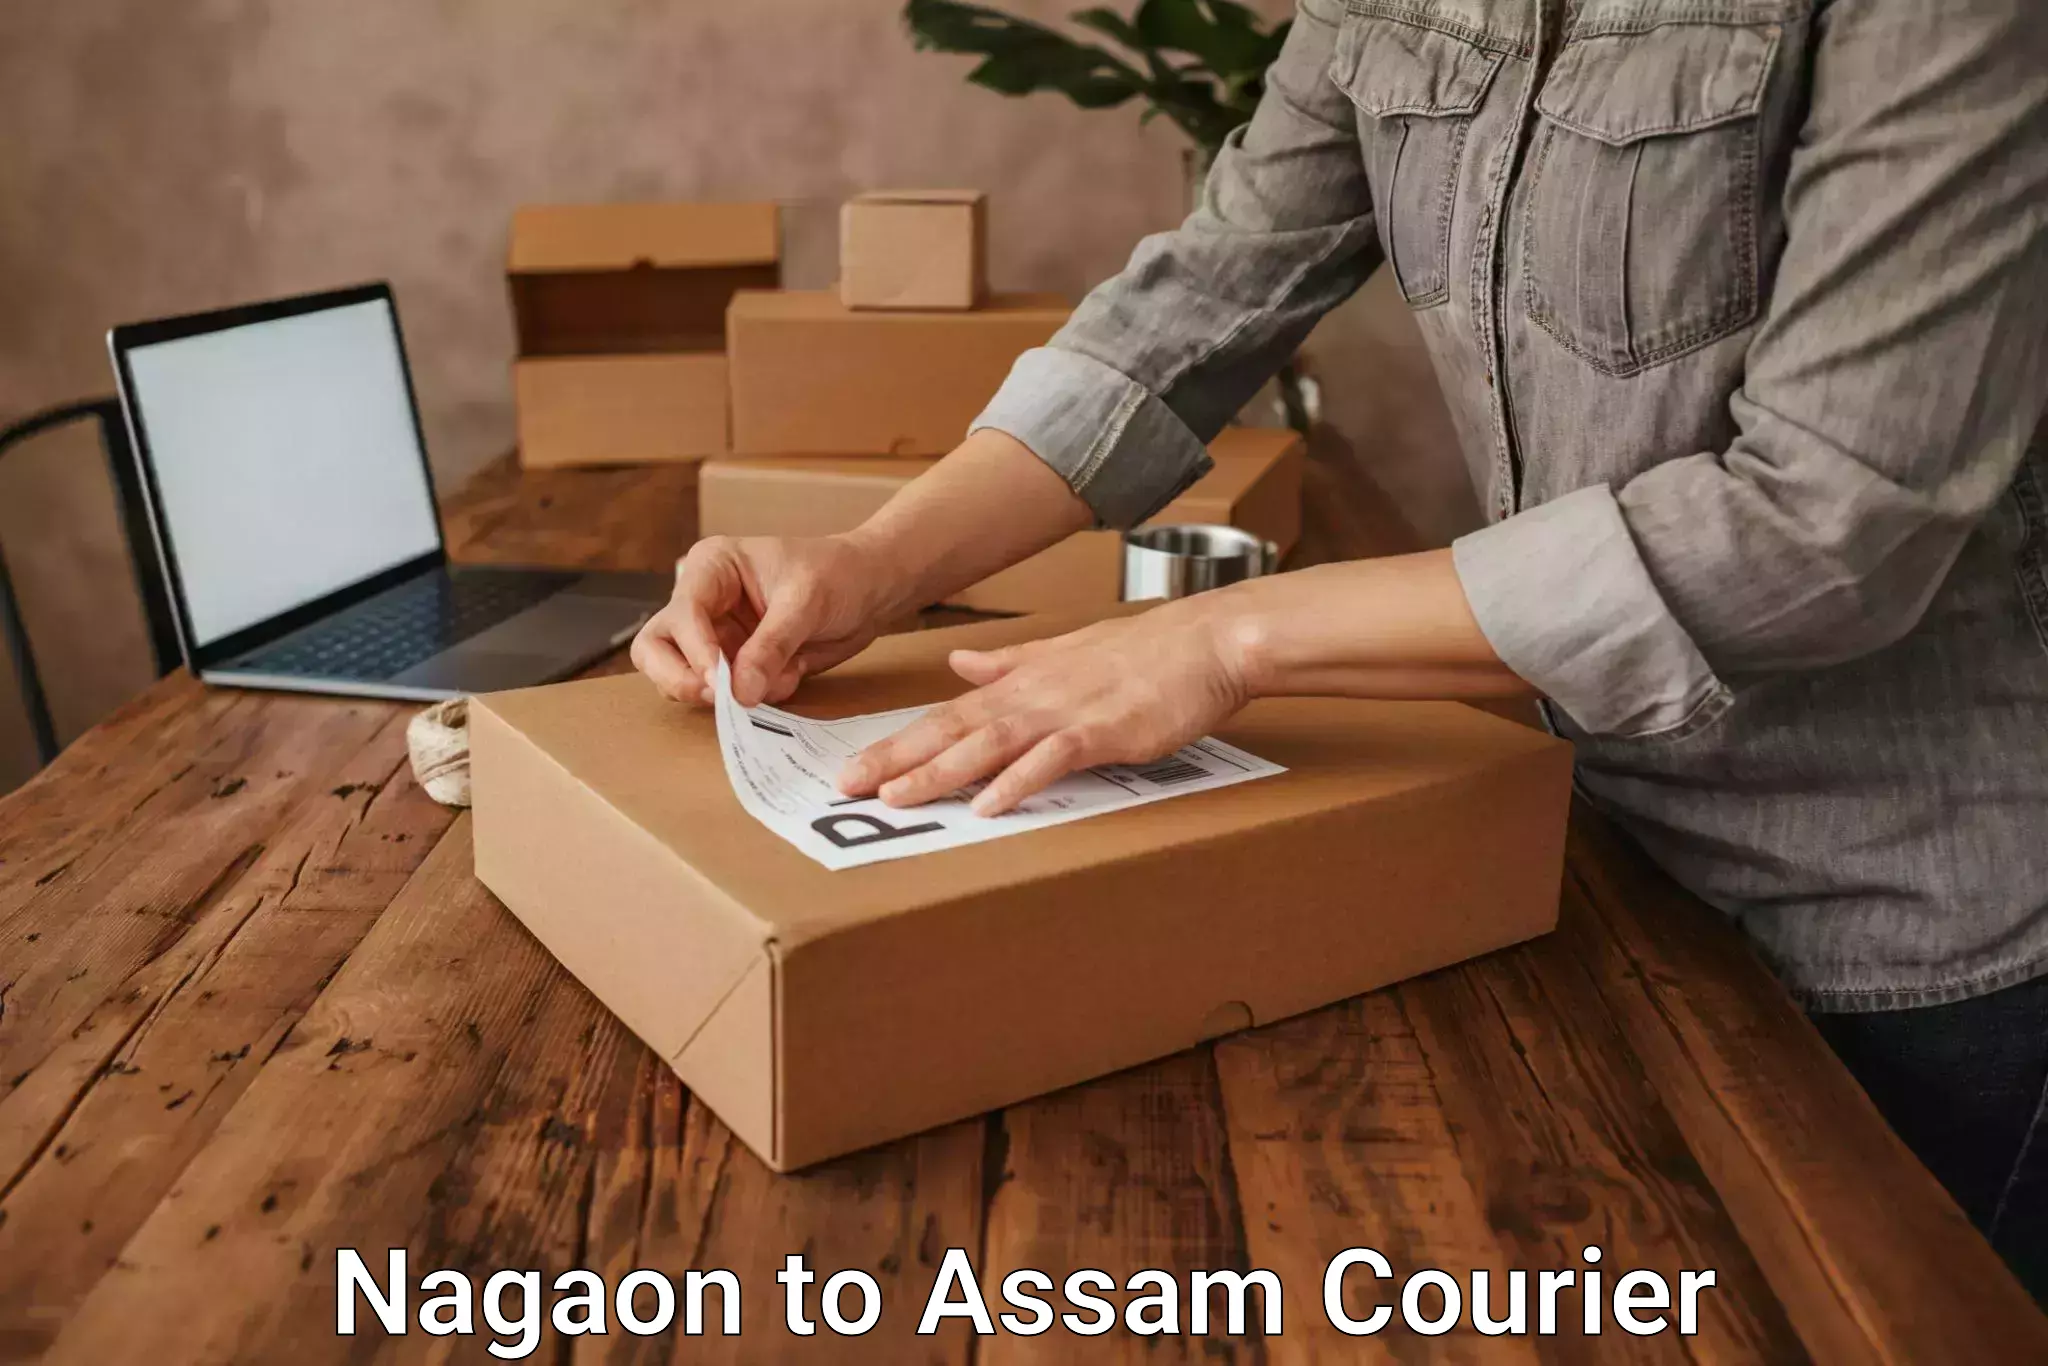 High-priority parcel service Nagaon to Dibrugarh